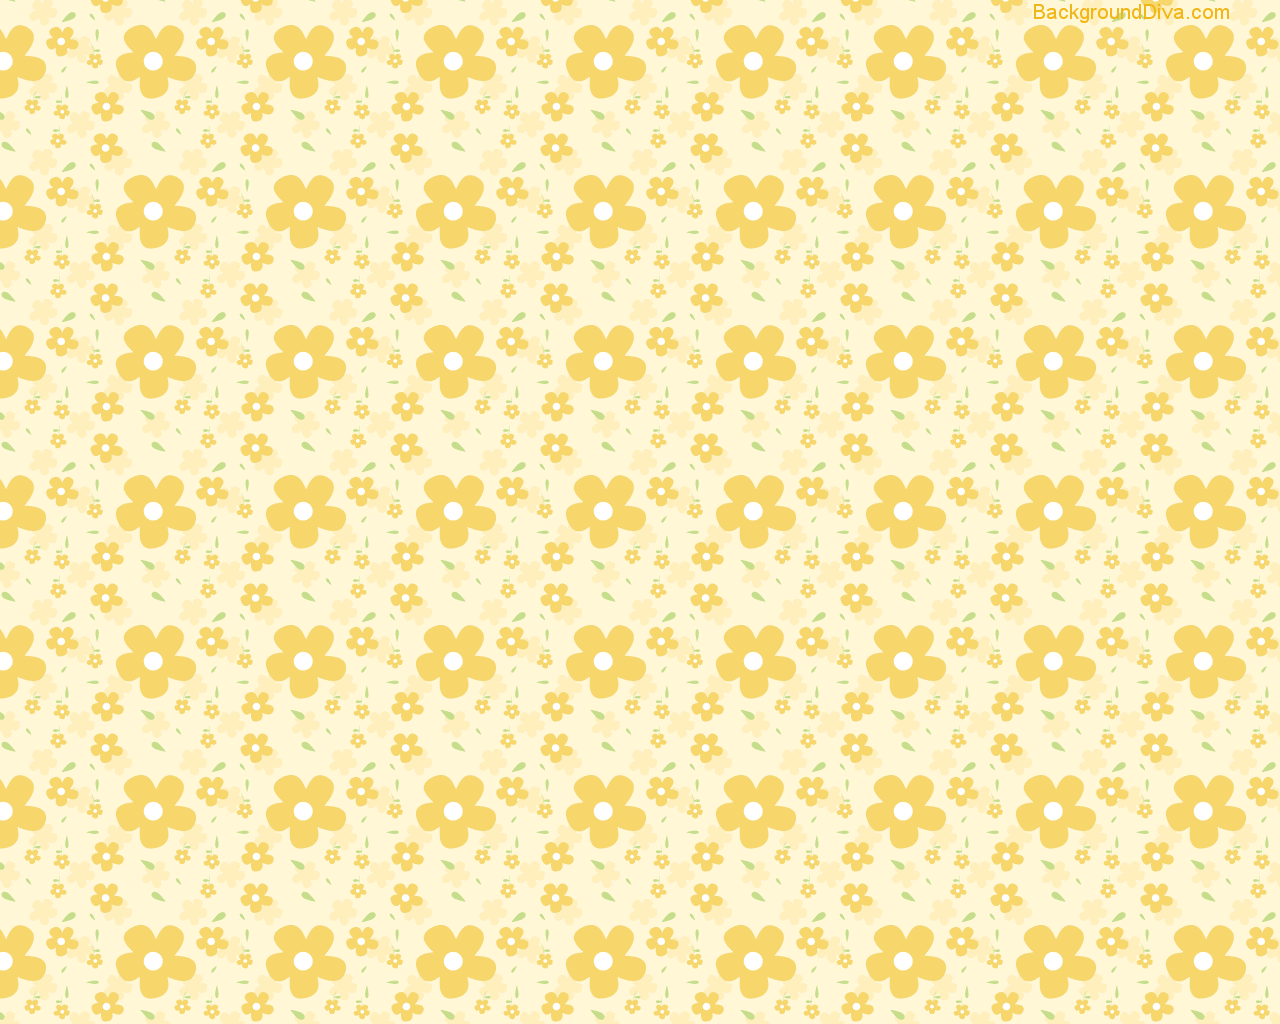 Girly Dots Wallpapers - Top Free Girly Dots Backgrounds ...